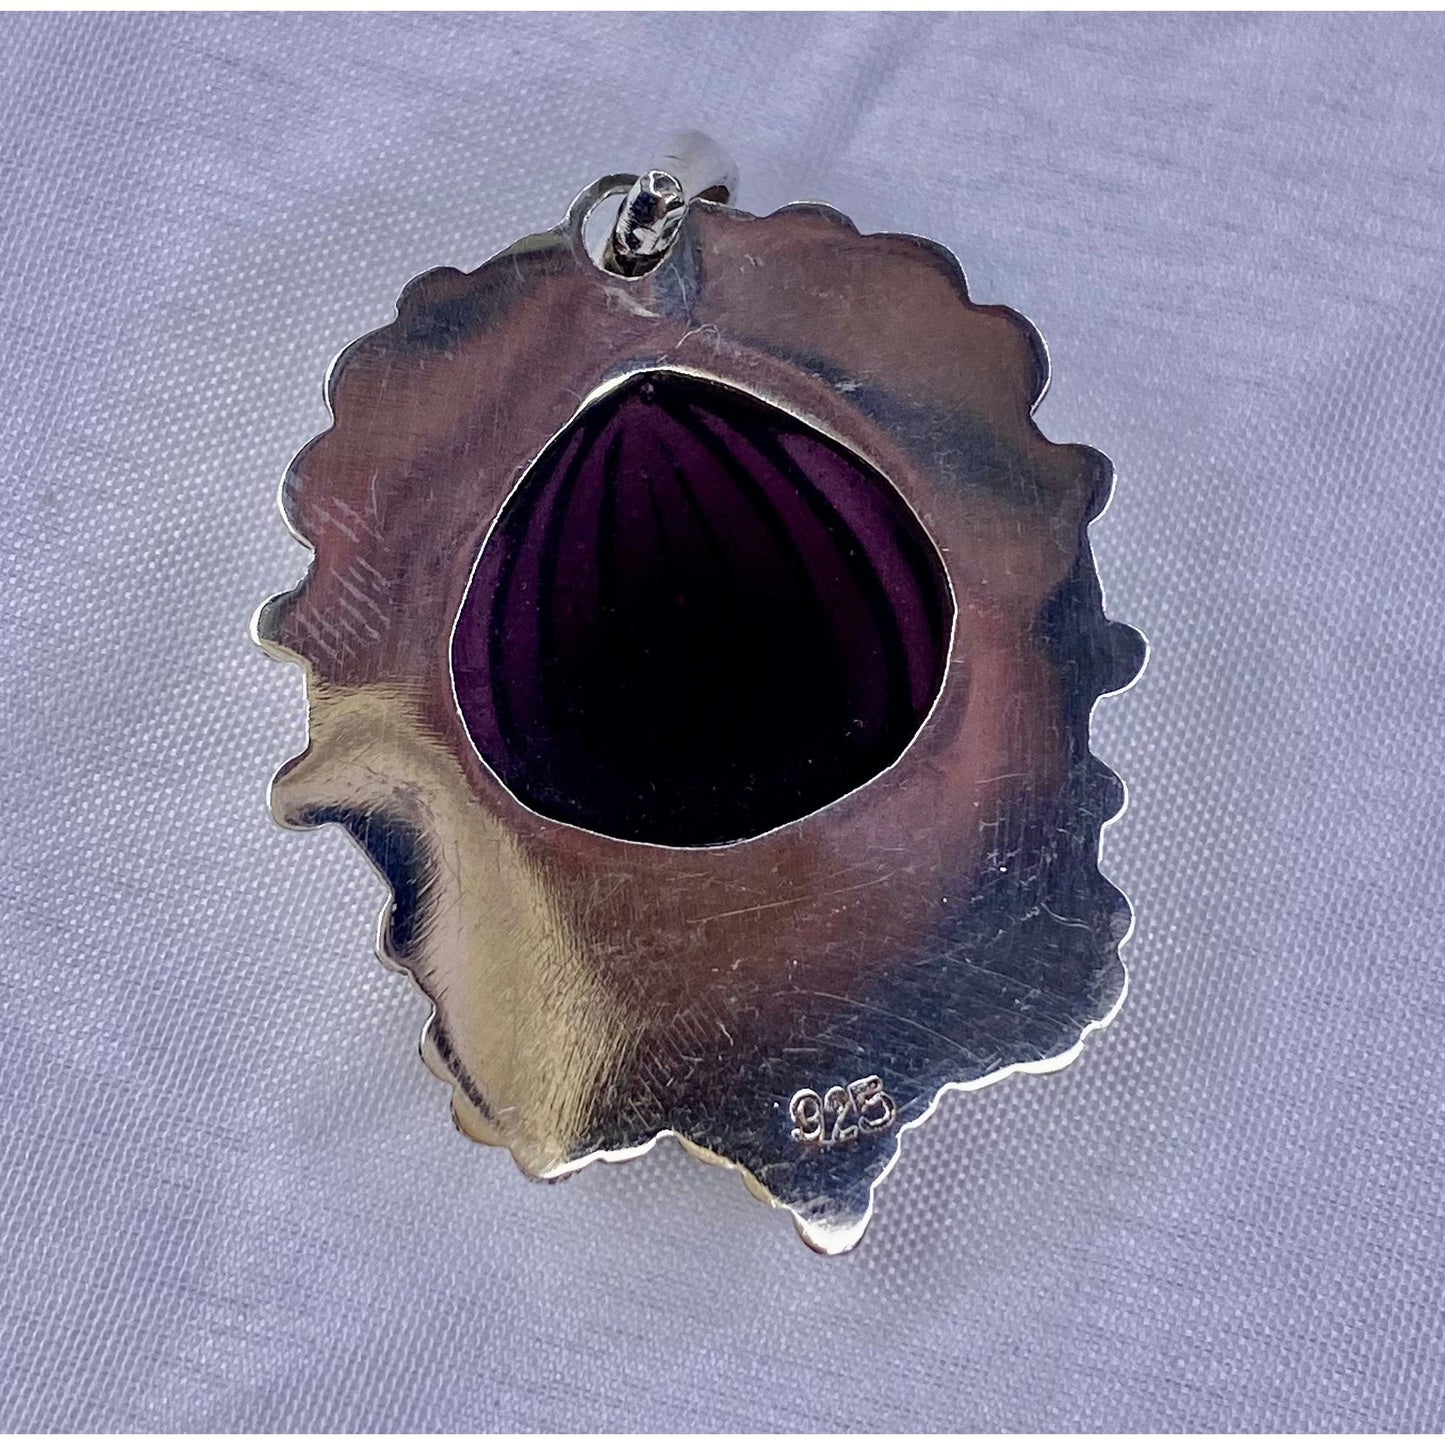 FJL Jewelry Sterling Silver Pendant Silver and Amethyst Pendant with Garnet StonesSterling silver natural stones